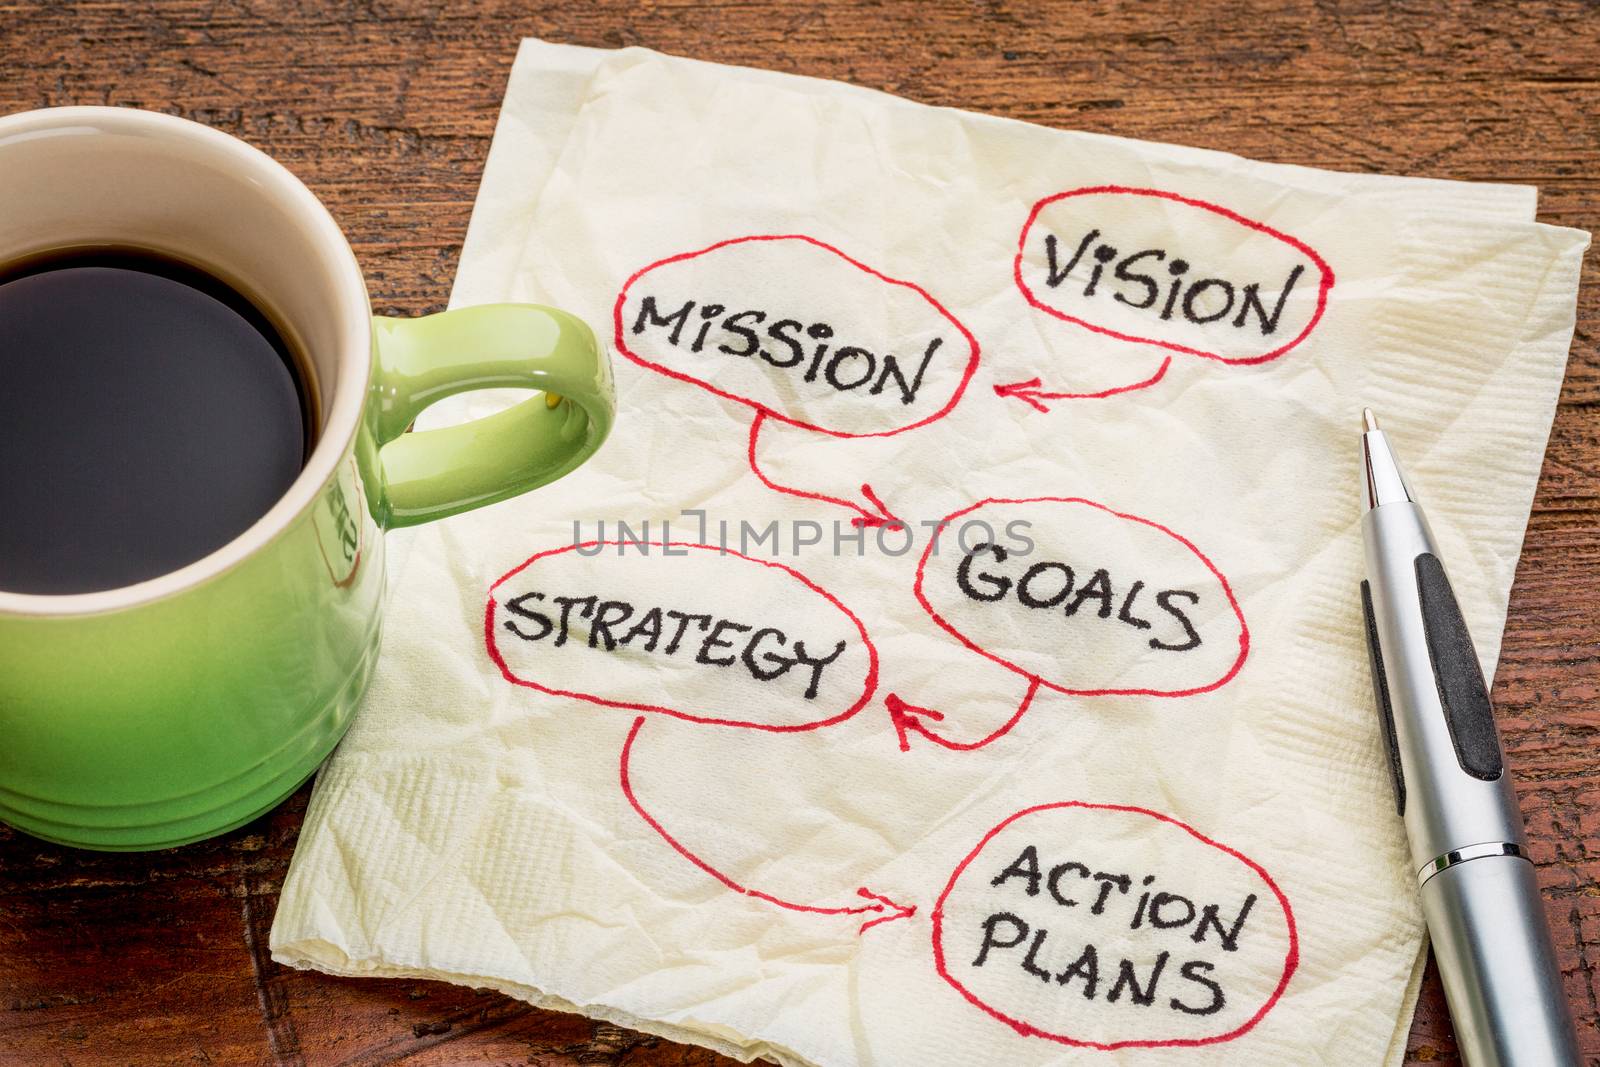 vision, mission, goals, strategyand asctio plans by PixelsAway